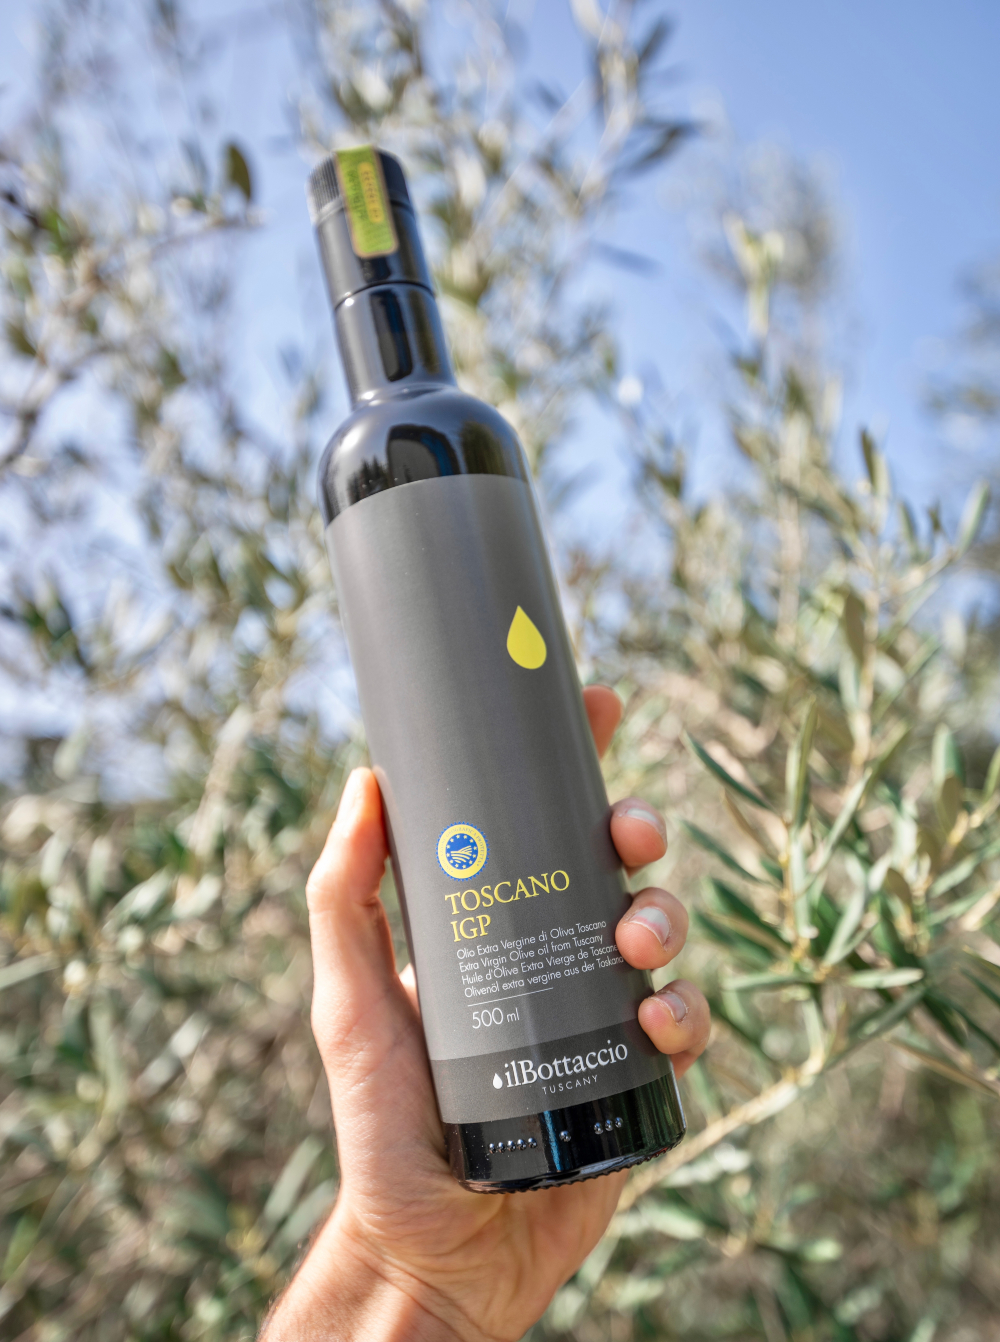 A hand holding a bottle of Il Bottacio extra virgin olive oil